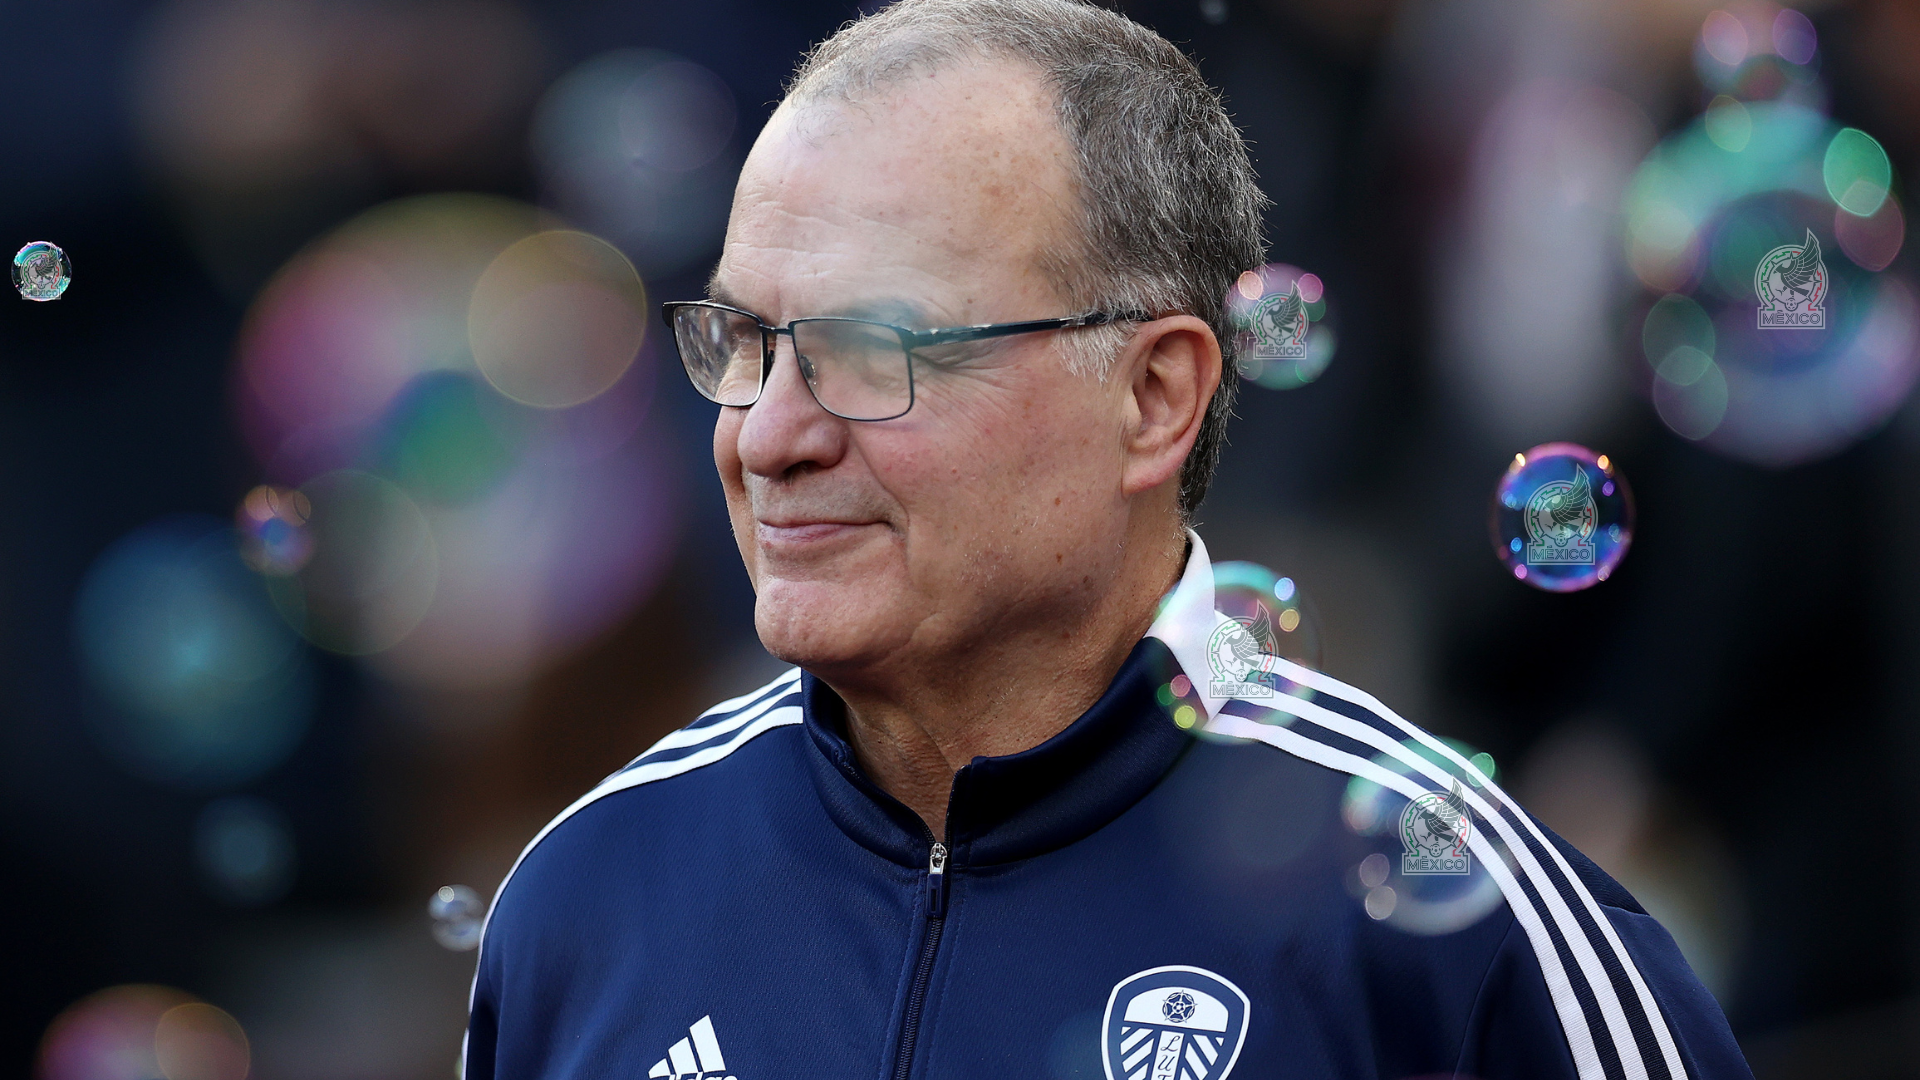 Is Marcelo Bielsa the next Mexico coach? Here's what we know